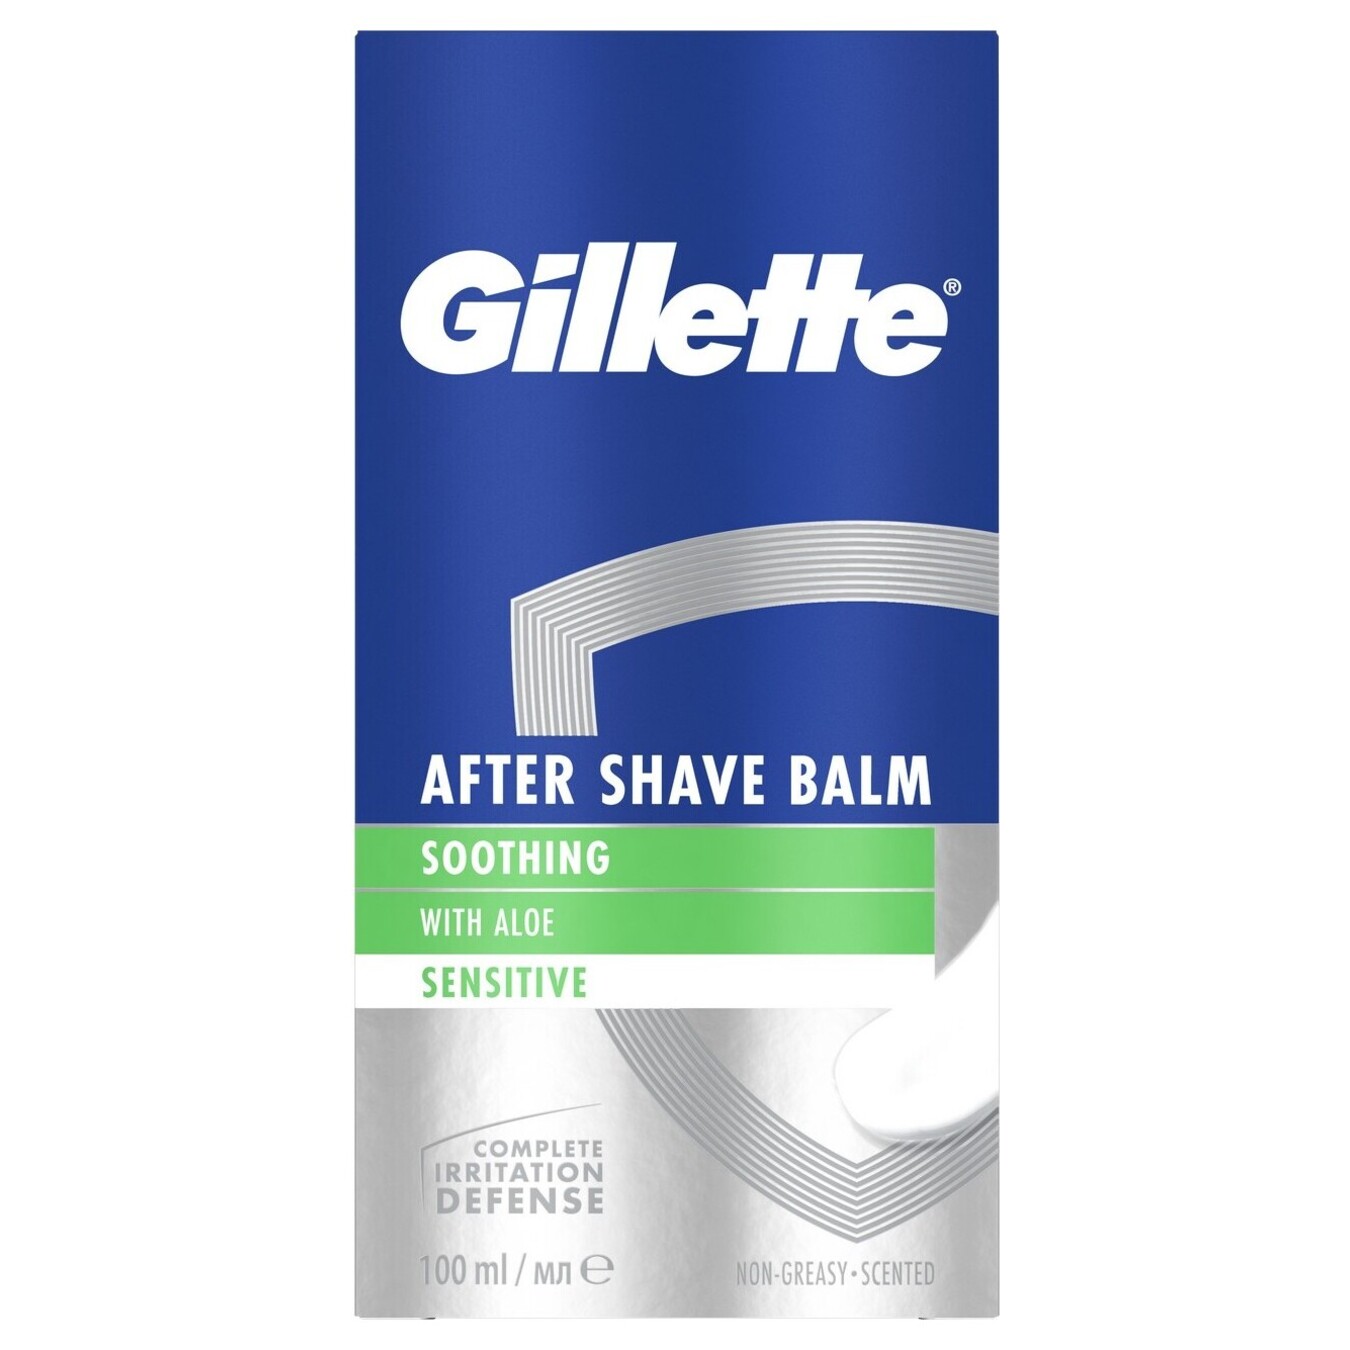 Gillette aftershave soothing balm 100ml 3